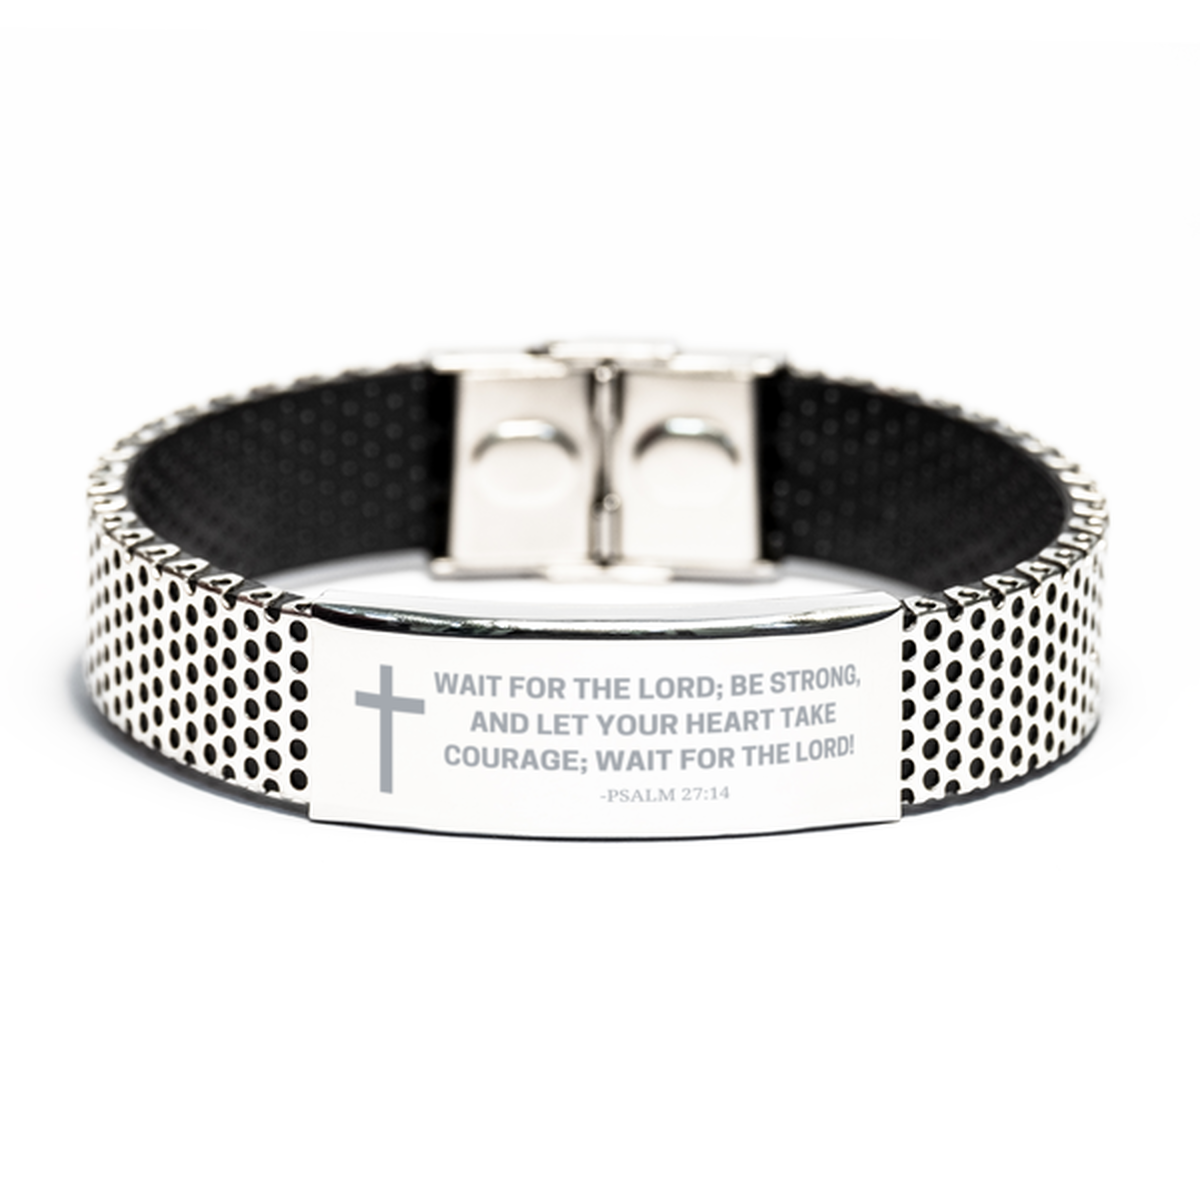 Baptism Gifts For Teenage Boys Girls, Christian Bible Verse Stainless Steel Bracelet, Wait for the Lord, Catholic Confirmation Gifts for Son, Godson, Grandson, Nephew